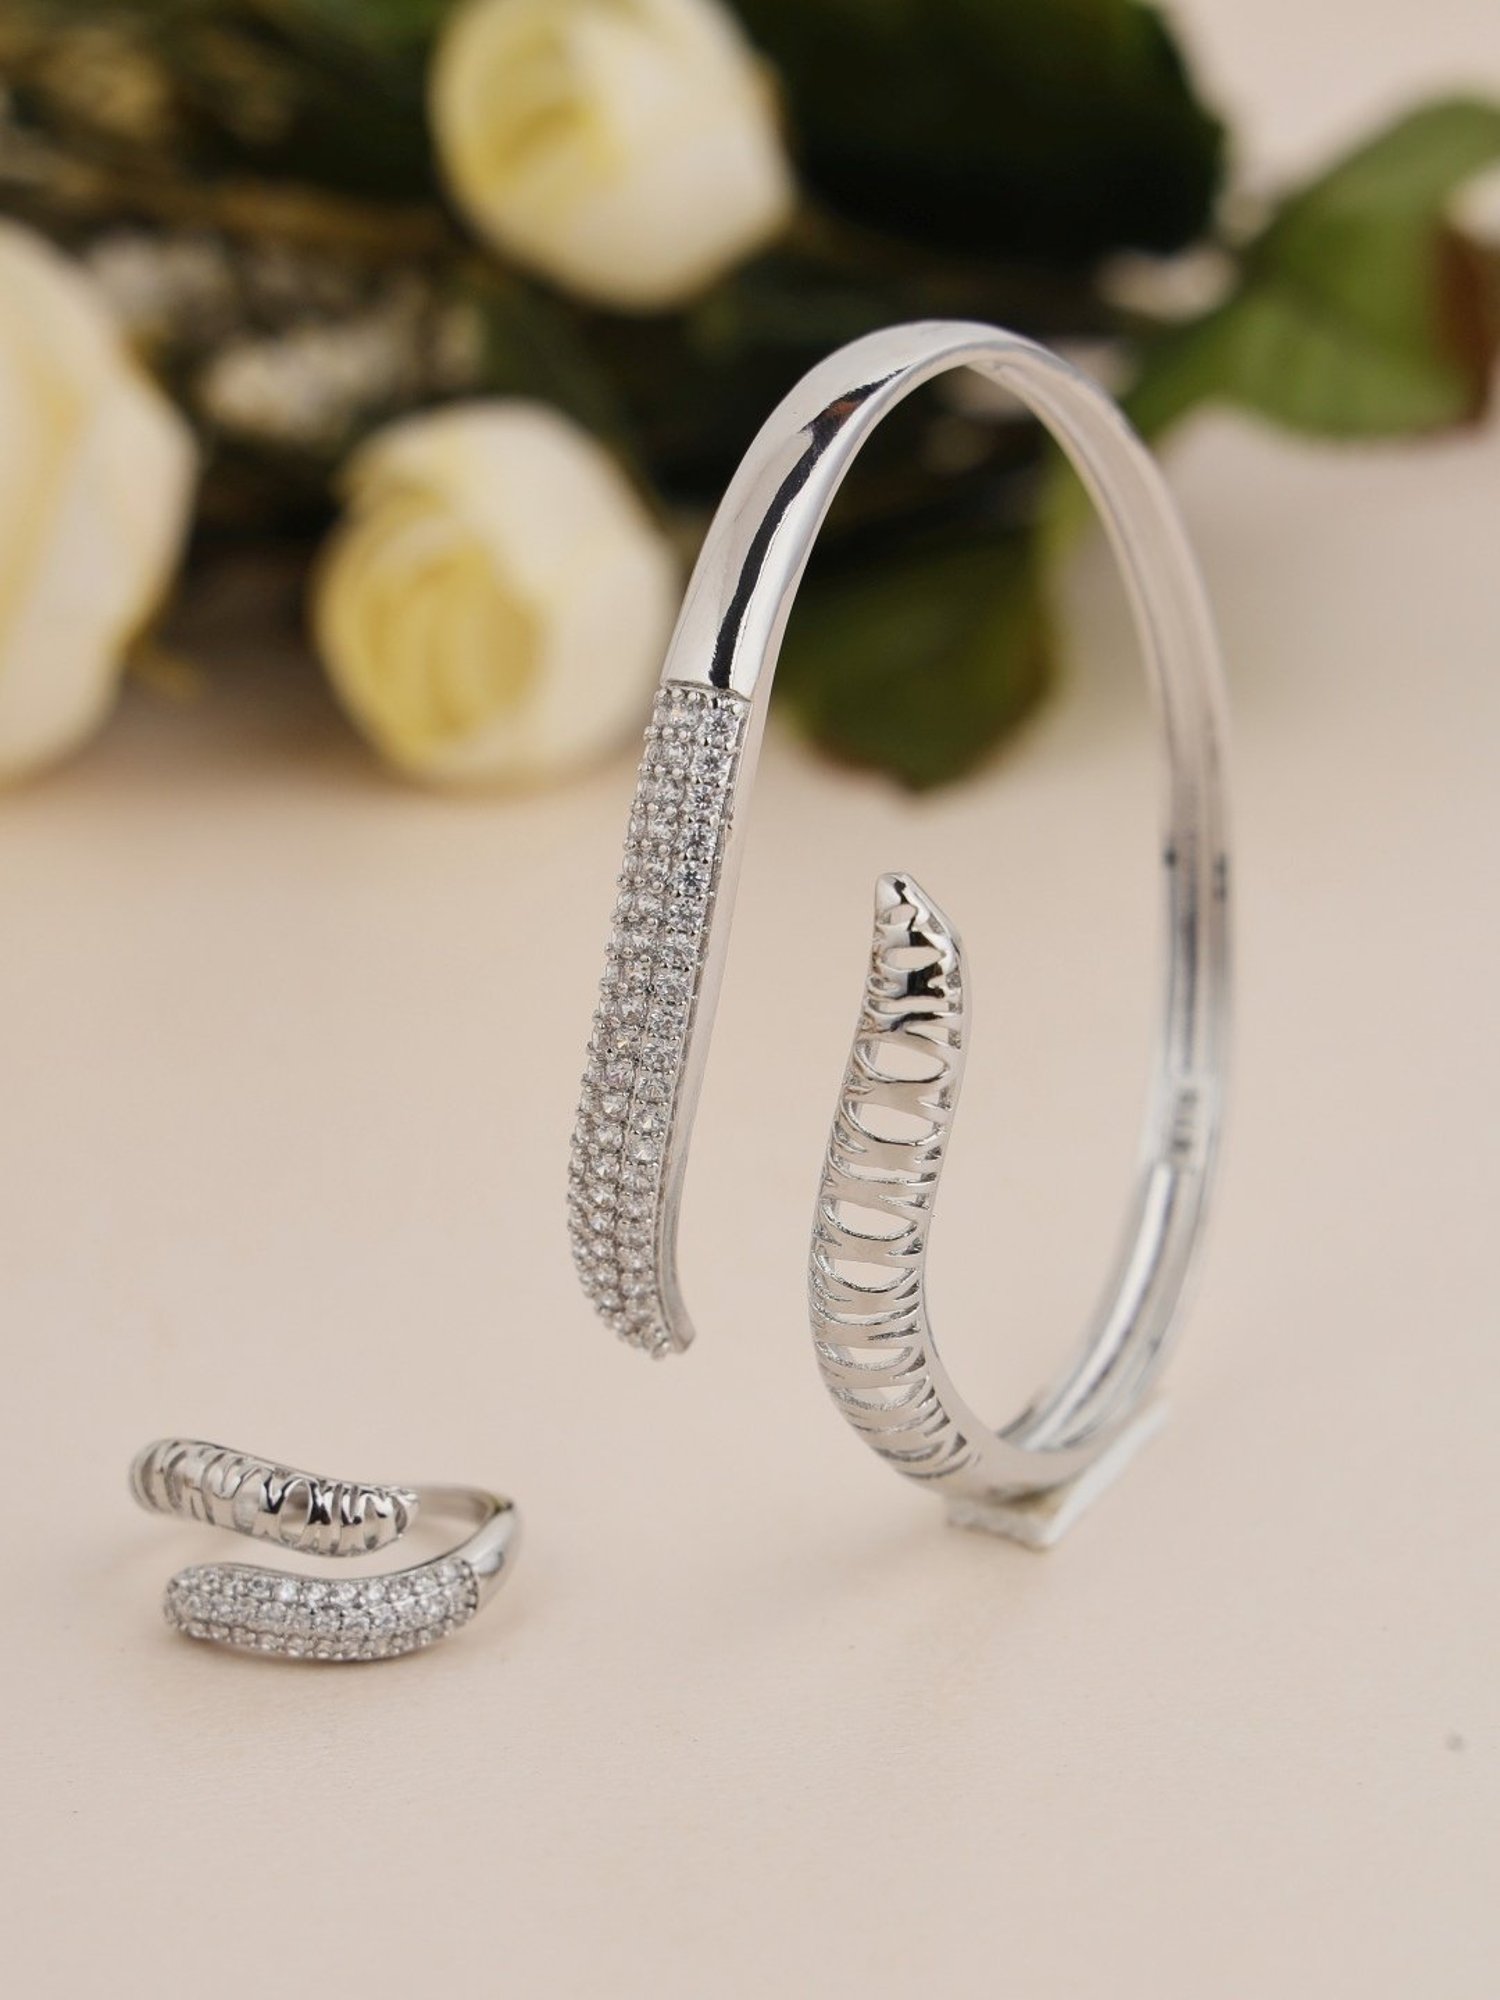 Buy 925 Sterling Silver Handmade Plain Shiny Bright Customized Bangle  Bracelet Kada, Excellent Personalized Gifting Unisex Jewelry Nsk358 Online  in India - Etsy